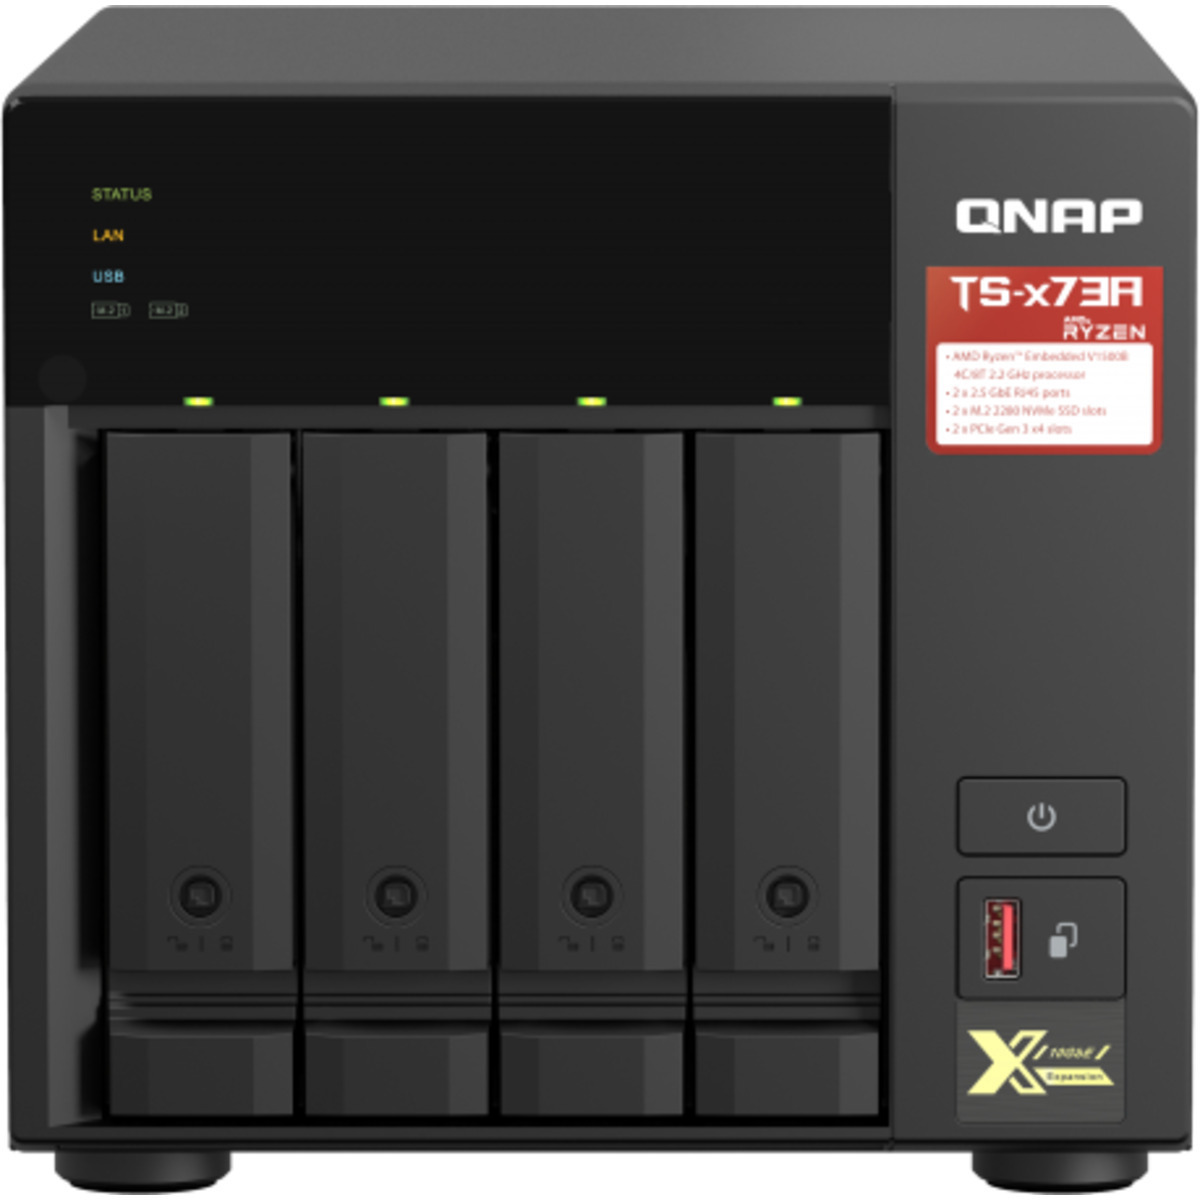 buy $2261 QNAP TS-473A 64tb Desktop NAS - Network Attached Storage Device 4x16000gb Toshiba Enterprise Capacity MG08ACA16TE 3.5 7200rpm SATA 6Gb/s HDD ENTERPRISE Class Drives Installed - Burn-In Tested - nas headquarters buy network attached storage server device das new raid-5 free shipping usa TS-473A